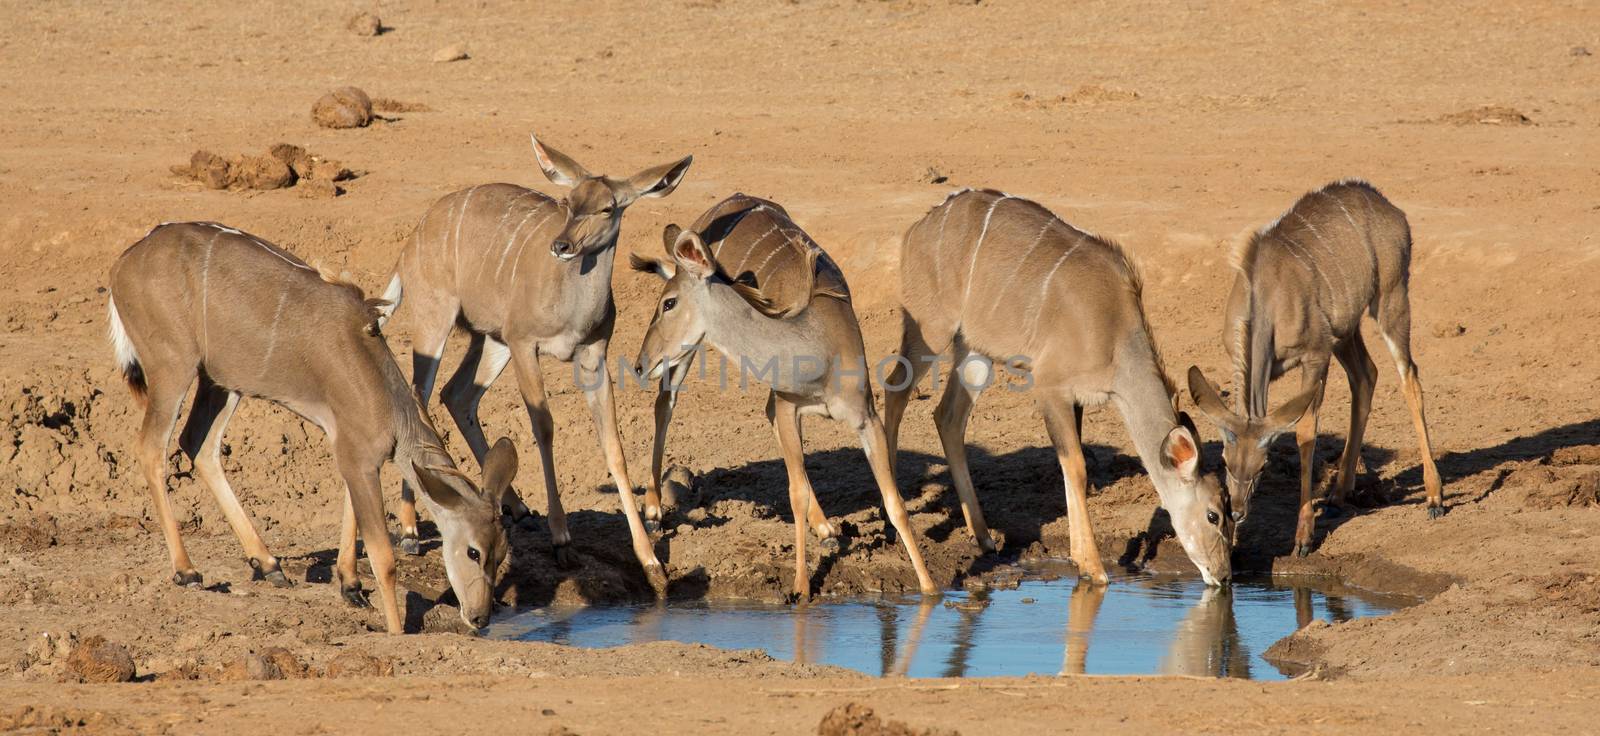 Impala Antelope Quenching Thirst by fouroaks